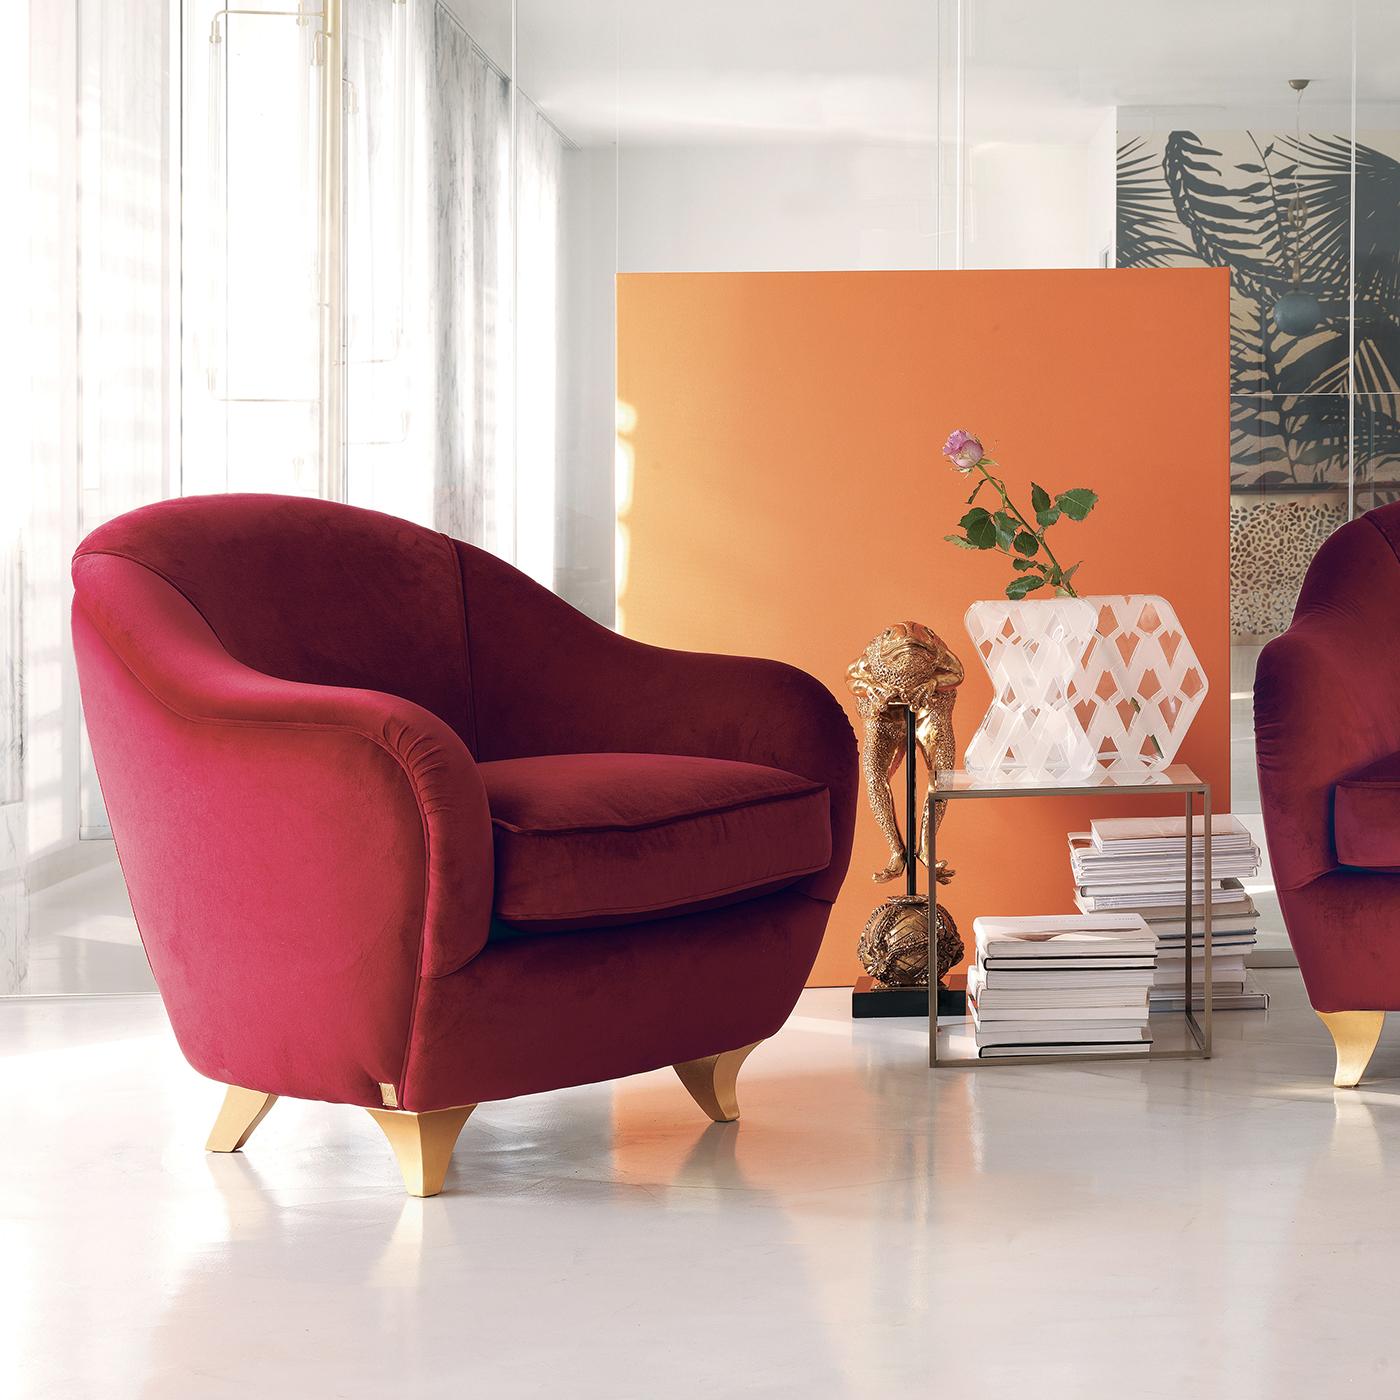 An exercise in comfort and modern design, this armchair is timeless and elegant and will bring a luxurious accent into any home. Either in an entrance, paired with a twin in the living room, or as accent chair in a bedroom, this chair will lend a